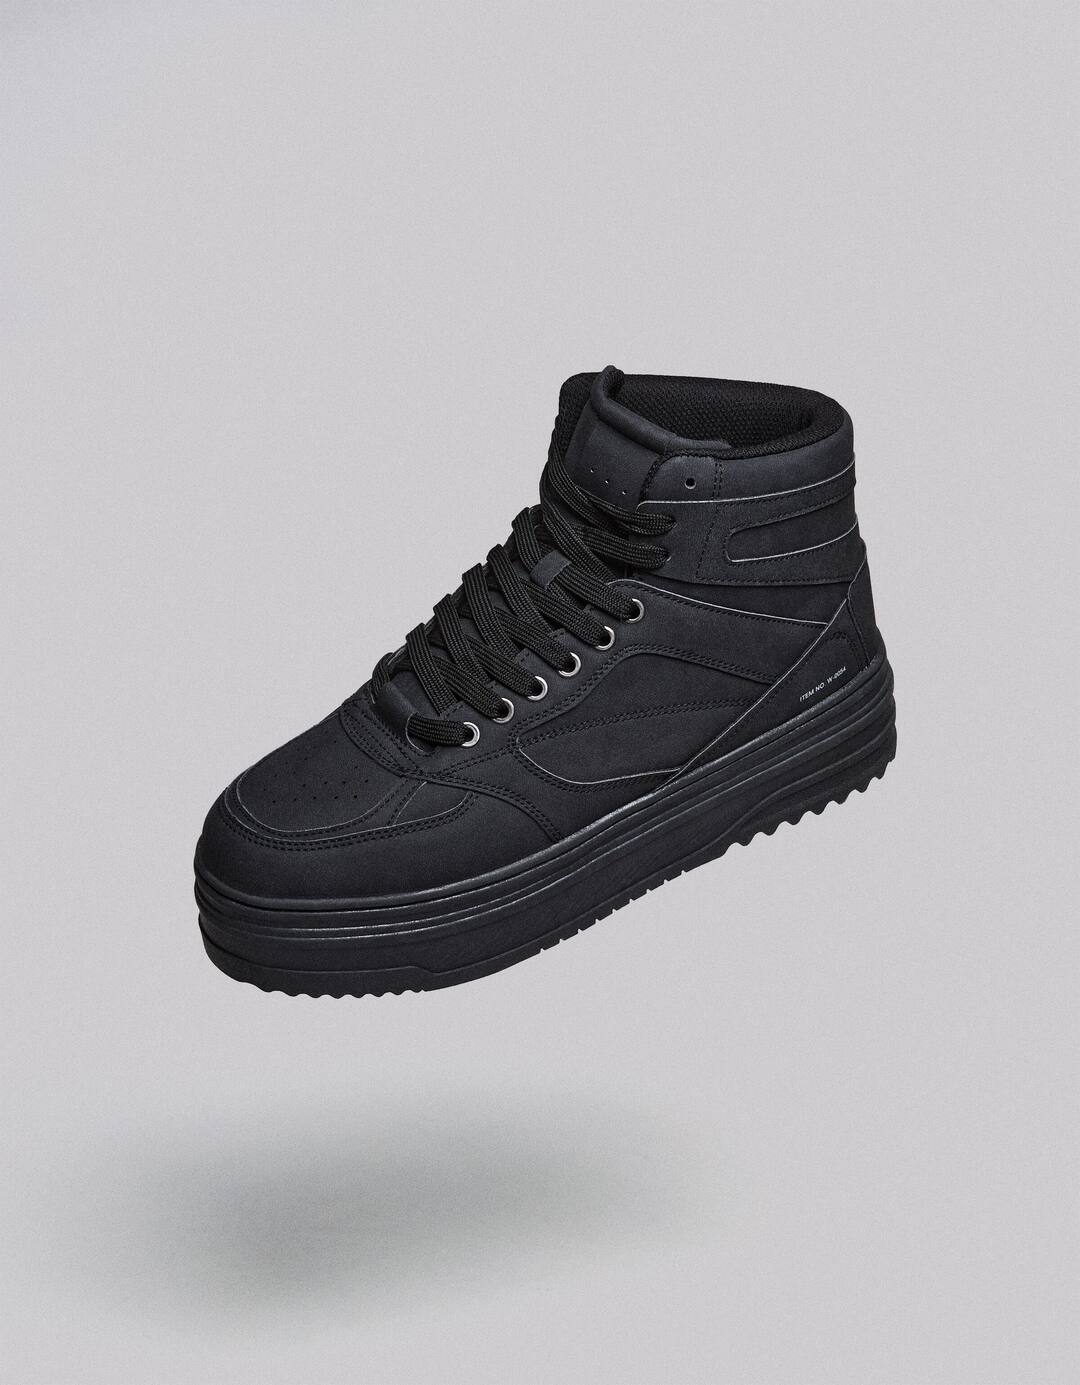 Men’s high-top trainers with thick soles